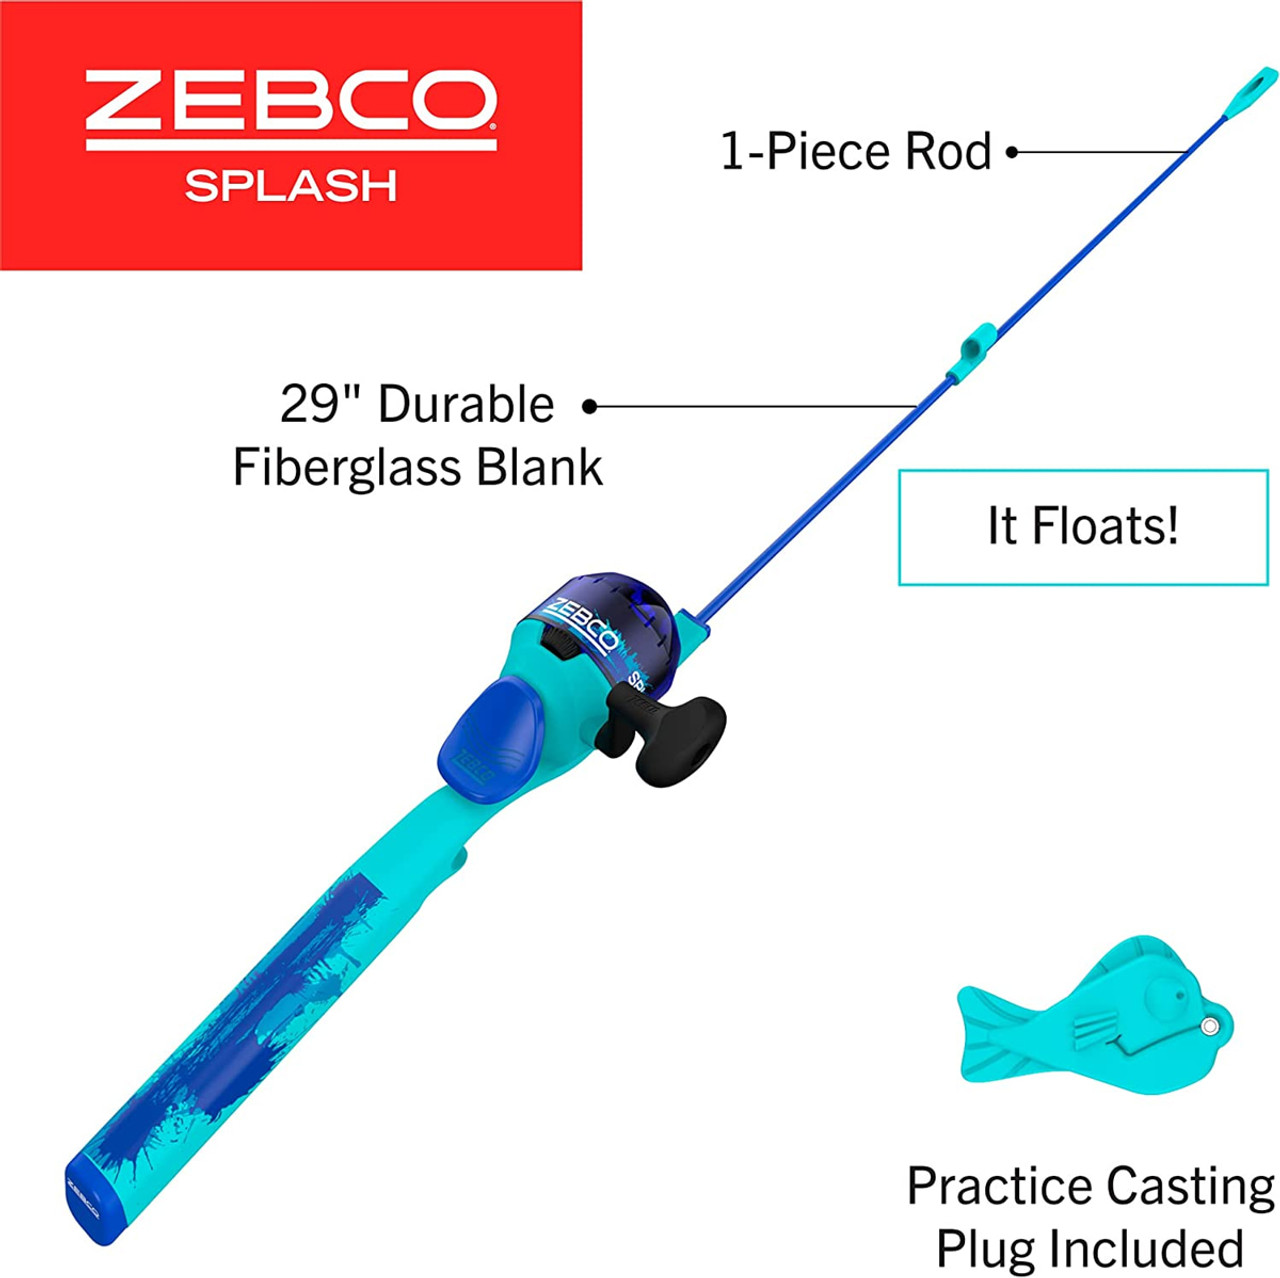 Best Zebco Fishing Poles? Zebco 404 vs Zebco 202: Differences and